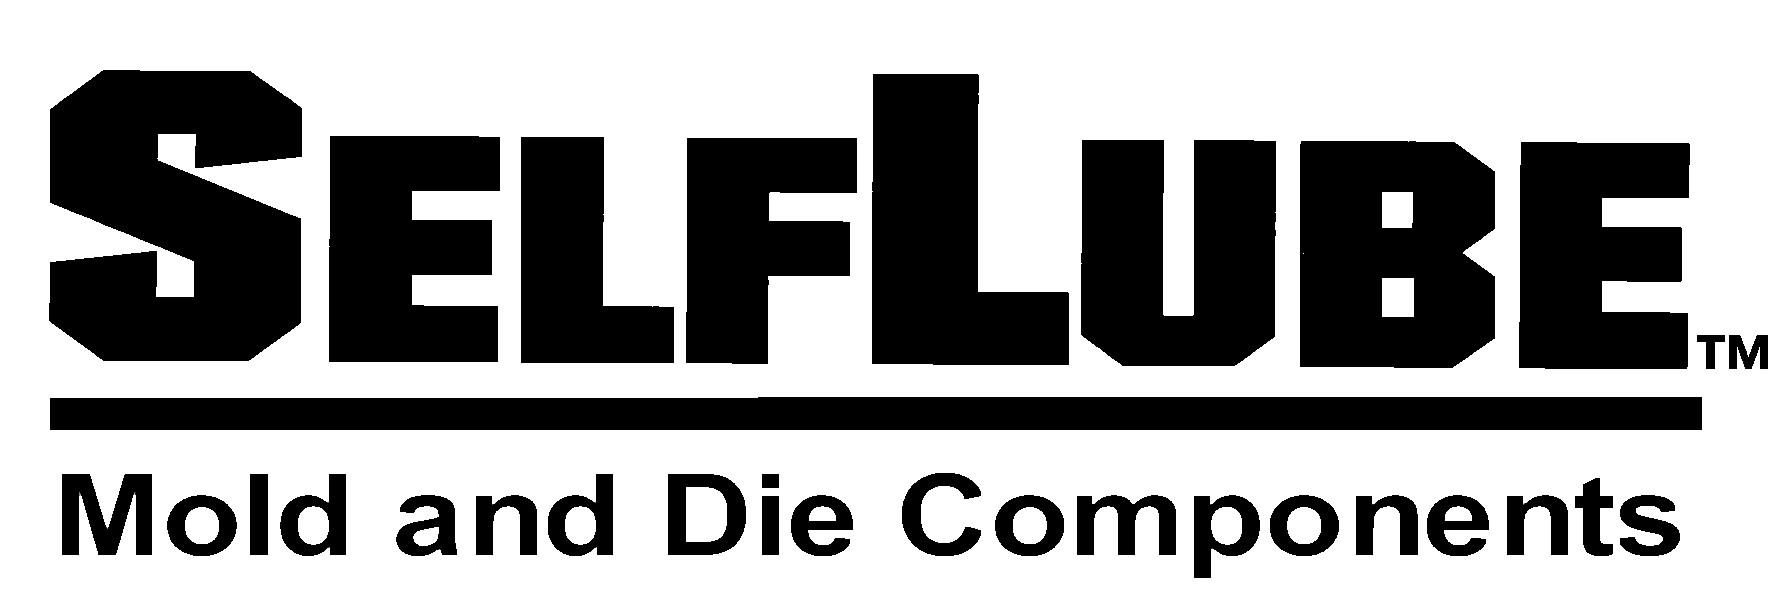 Leading U.S. manufacturer of mold and die components.